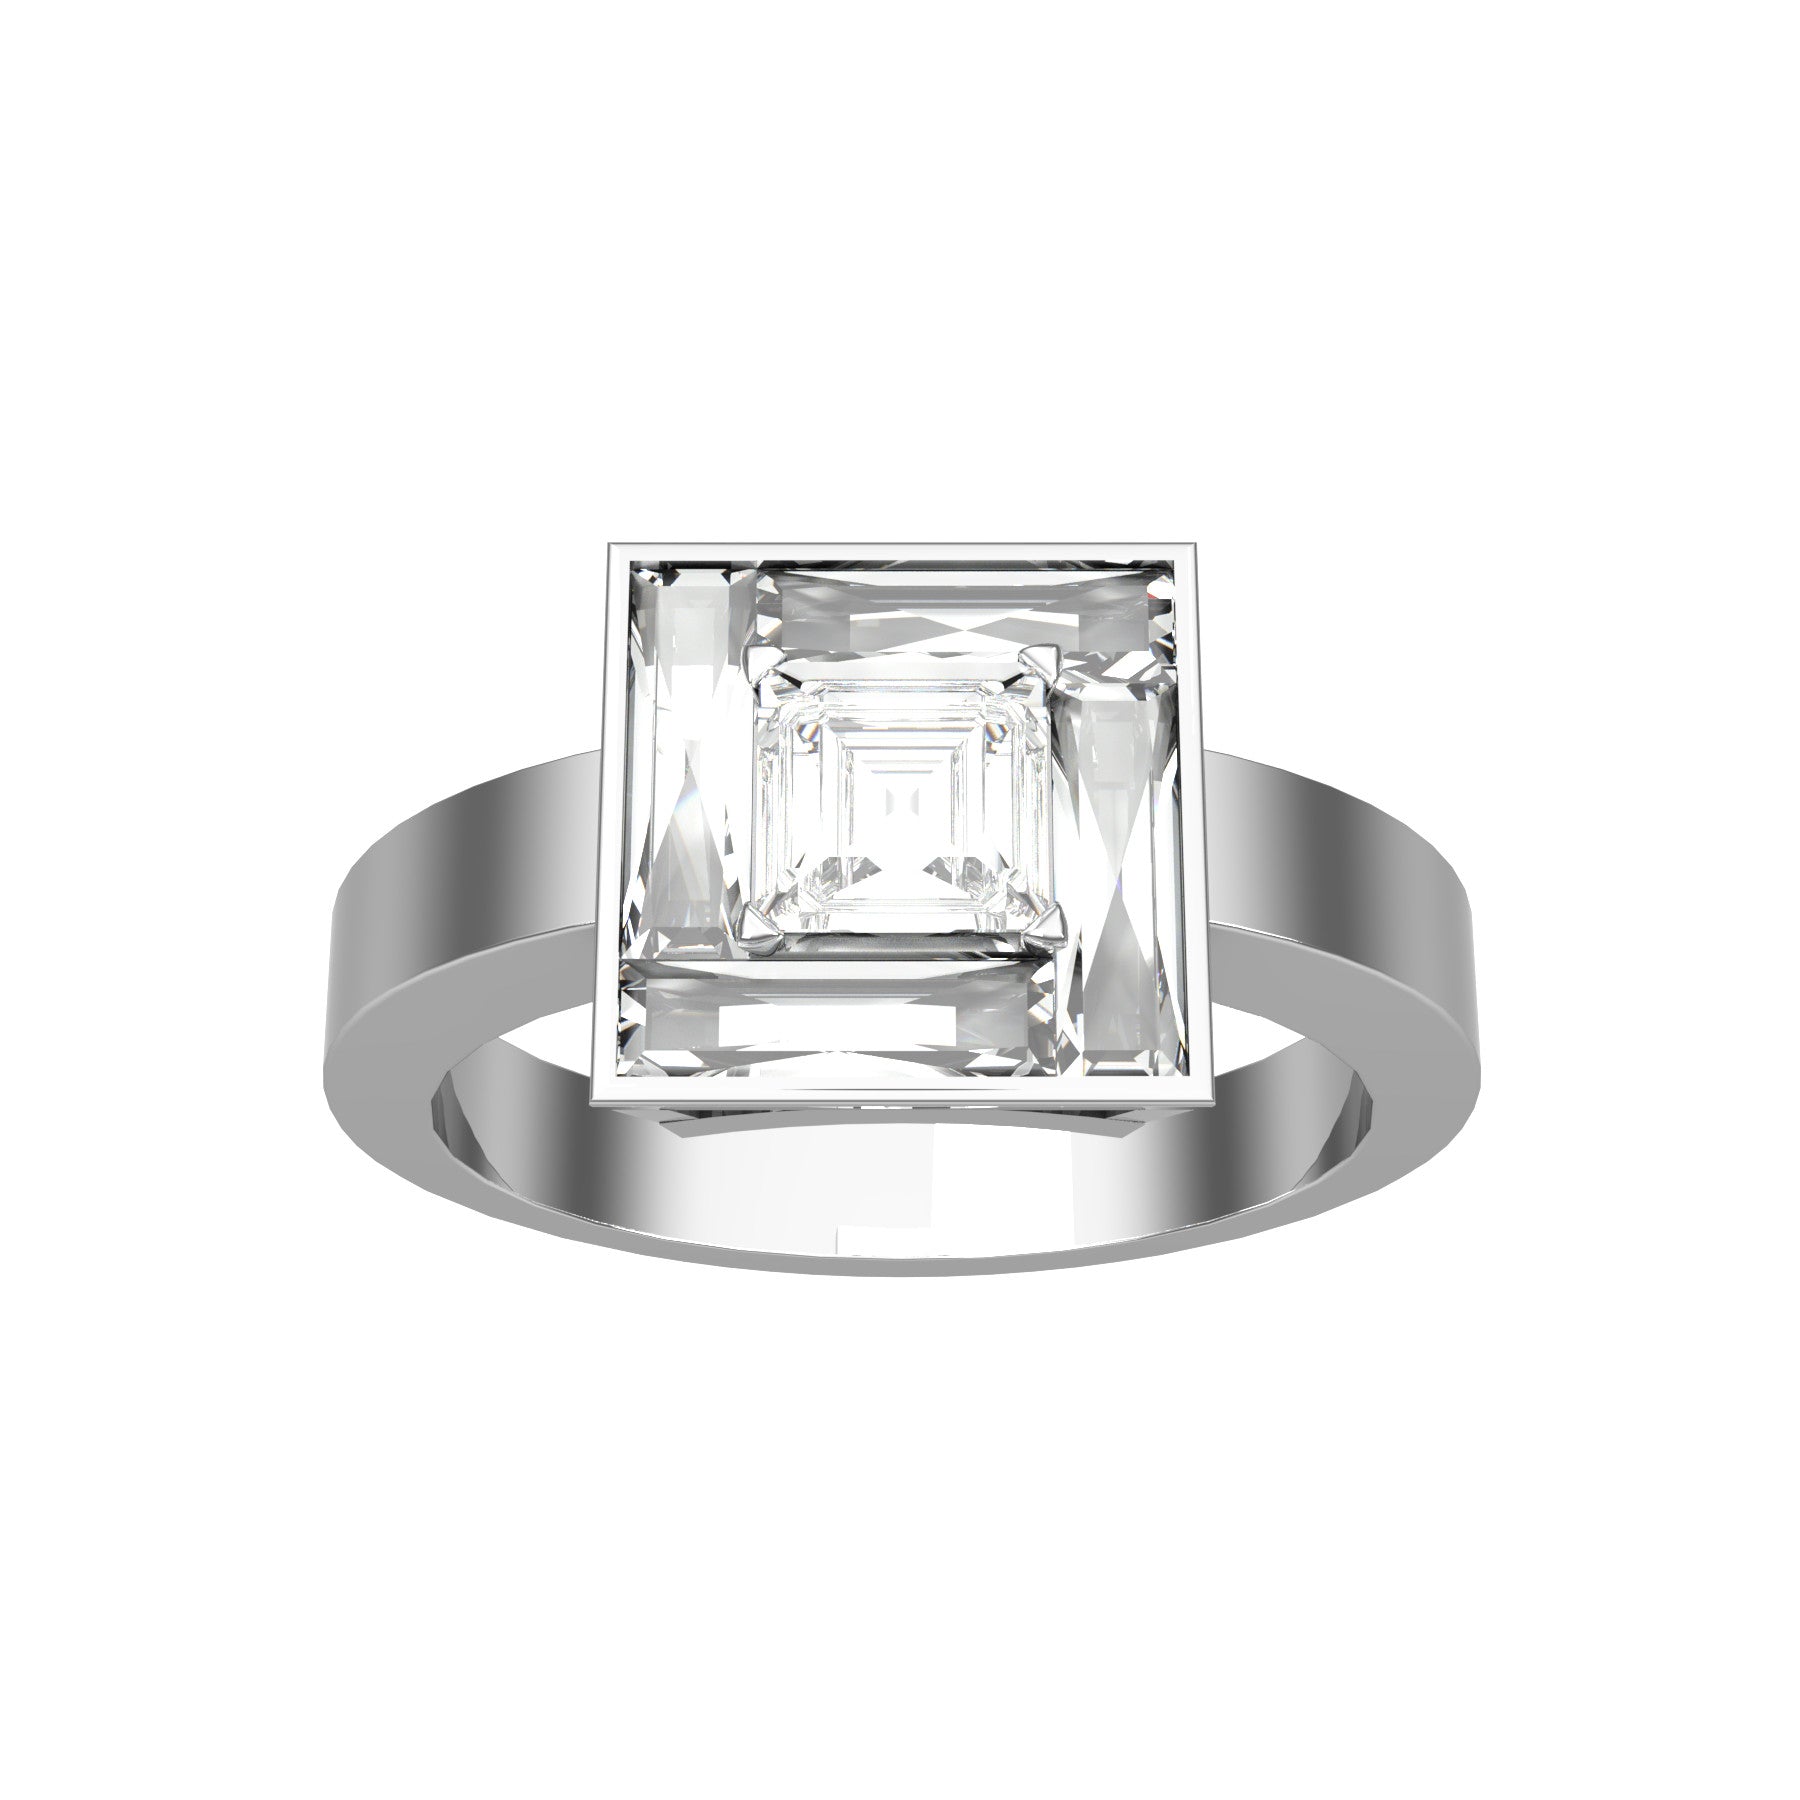 true passion engagement ring, 18 K white gold, 0,30 ct square emerald natural diamond, natural baguette diamonds, weight about 4,8 g. (0.17 oz), width 9,3 mm max